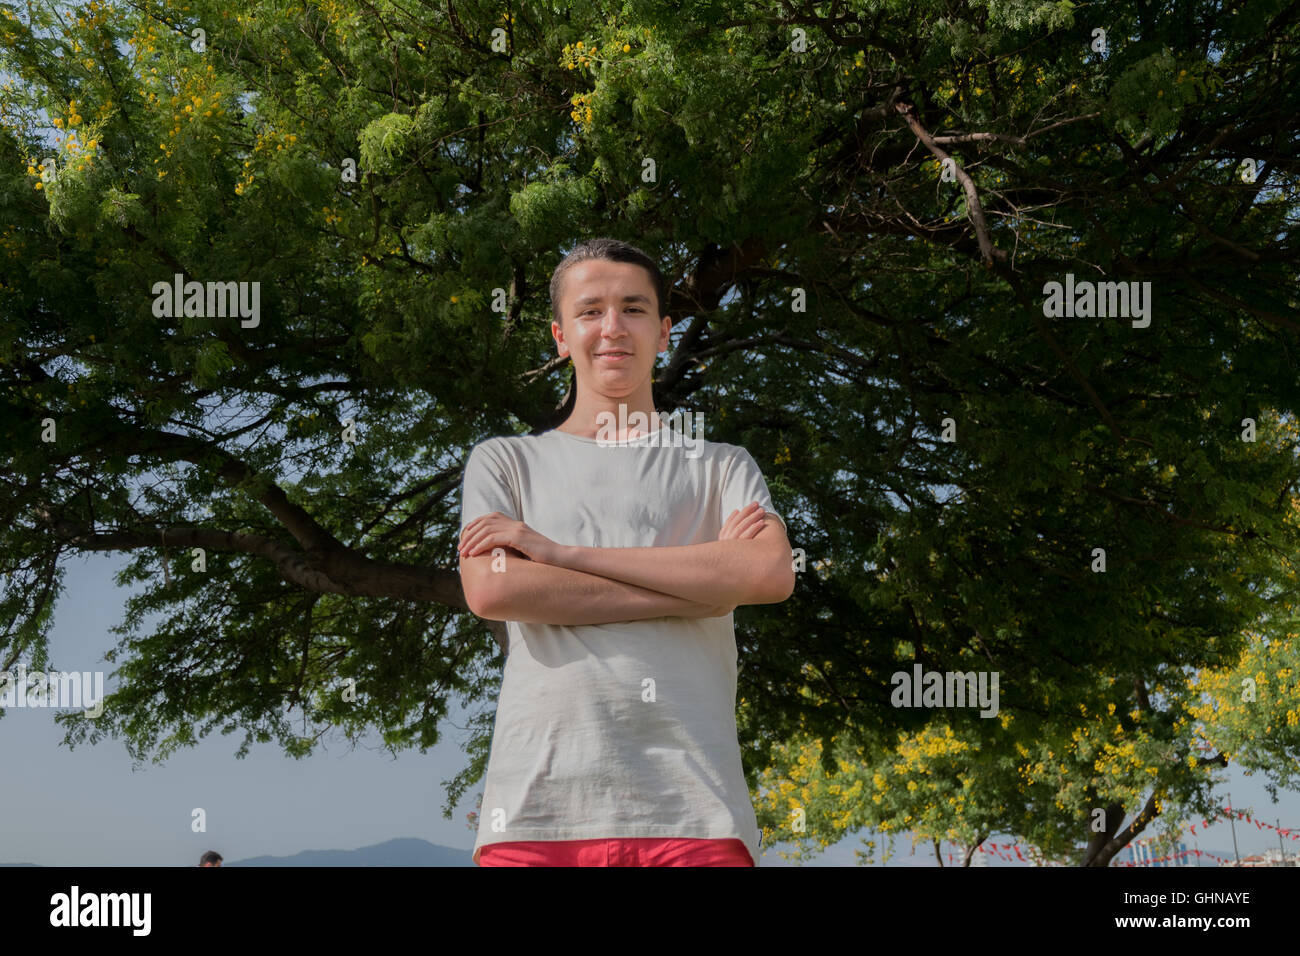 Portrait of young handsome man standing in front of a tree Stock Photo